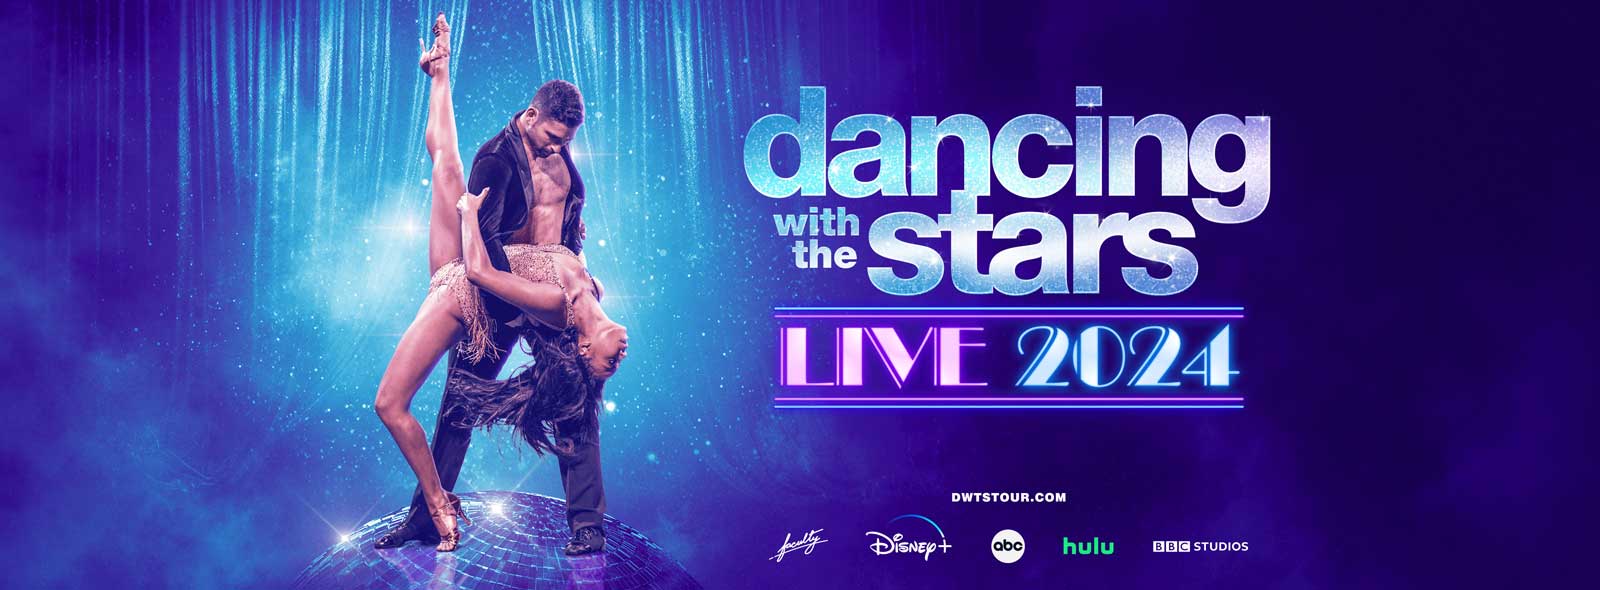 Dancing with the Stars Live 2024